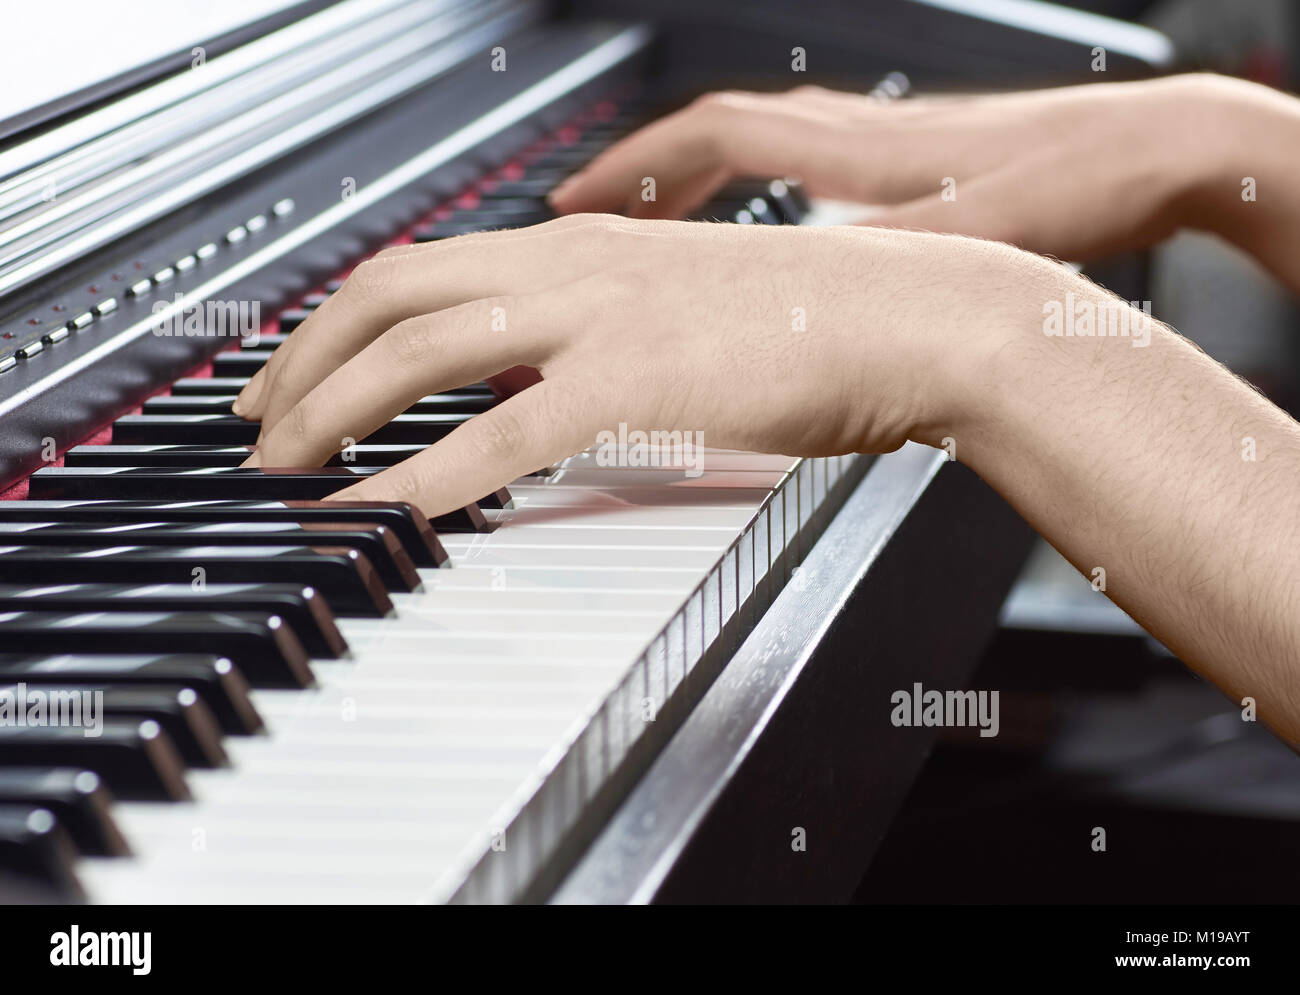 Wooden black piano with a keyboard and female hands of a musician, with a blurred background Stock Photo